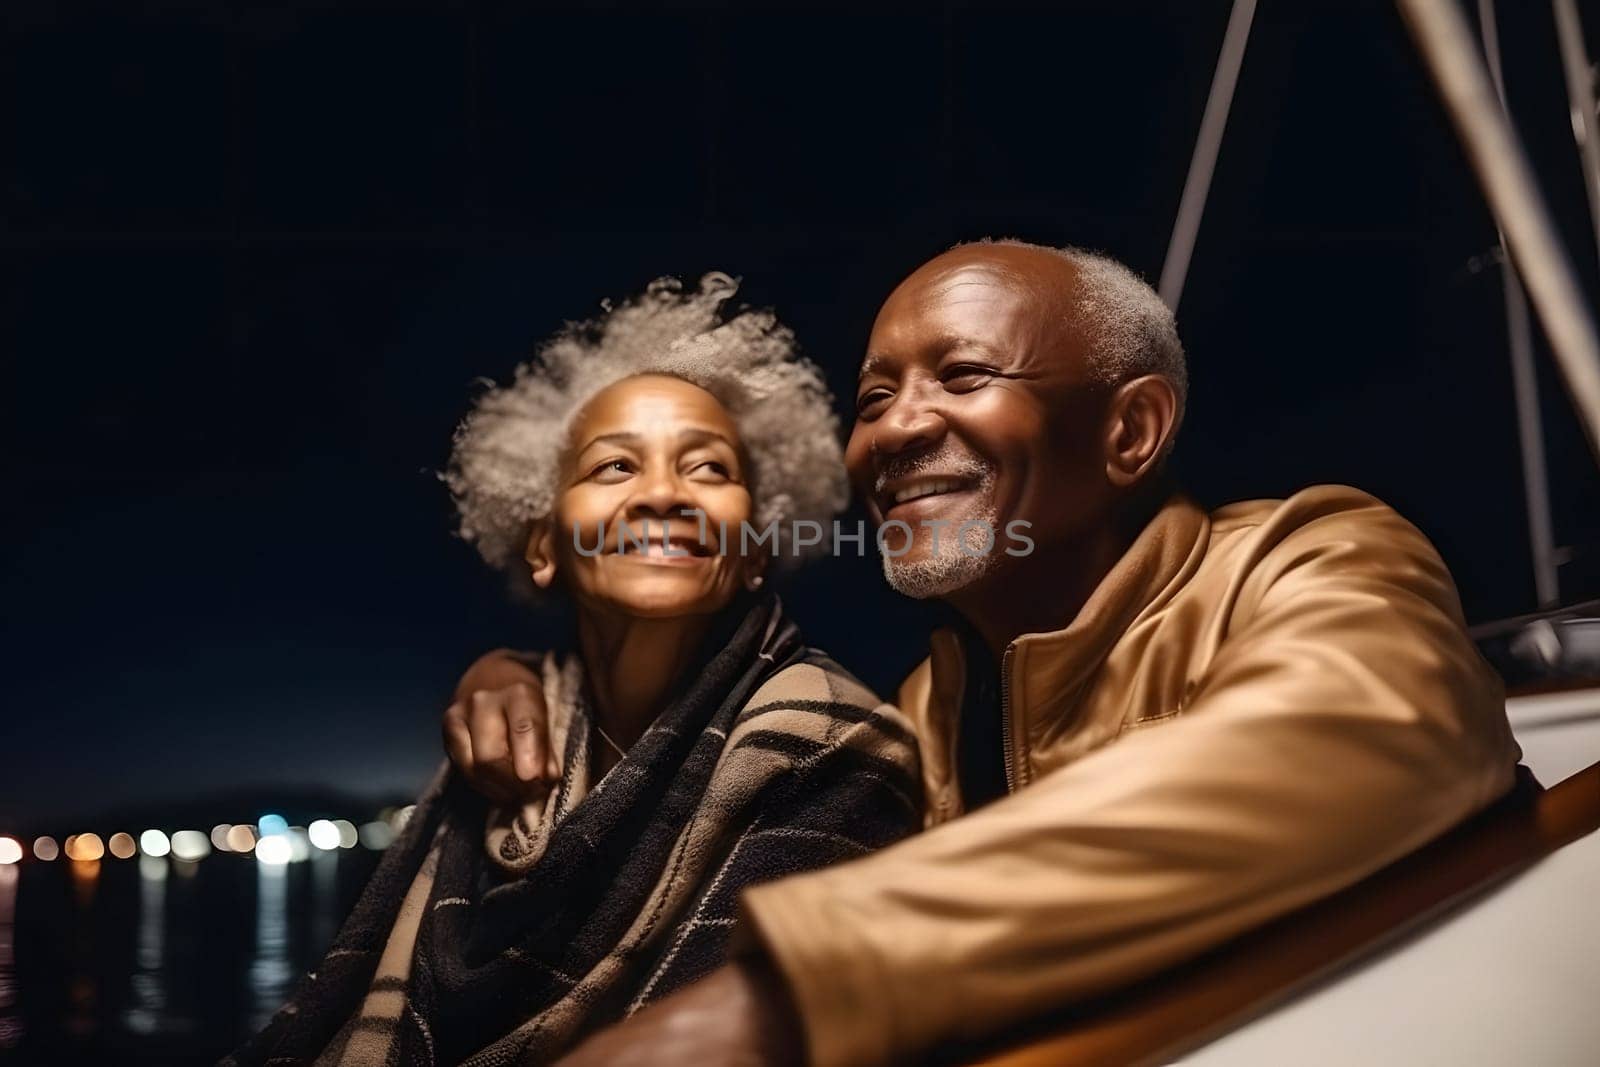 Beautiful and happy senior african american couple on a sailboat at night. Neural network generated in May 2023. Not based on any actual person, scene or pattern.